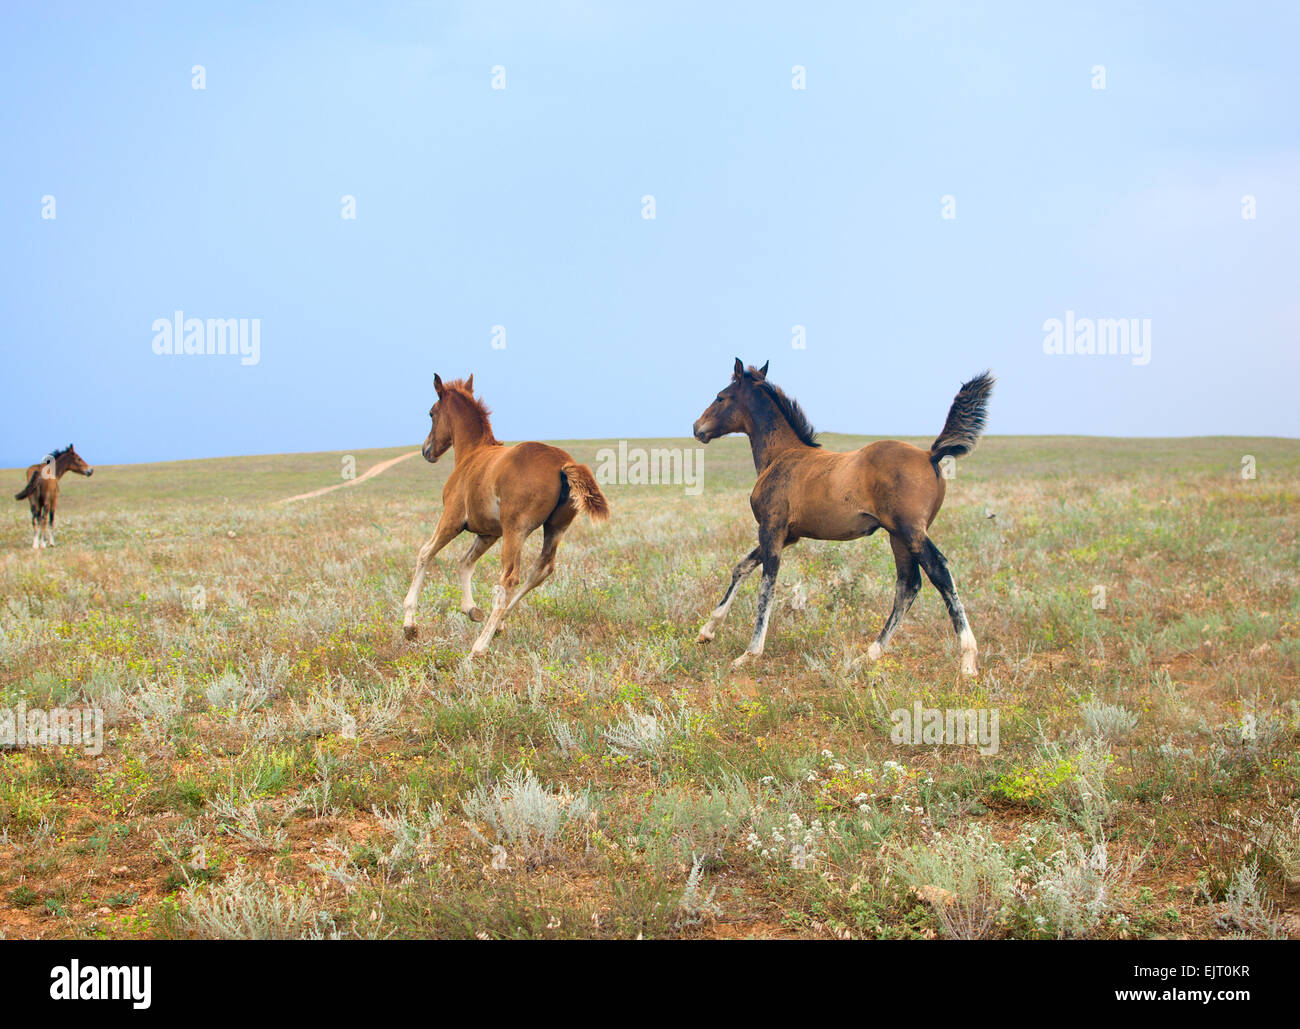 Three horses, foals running free in the field Stock Photo